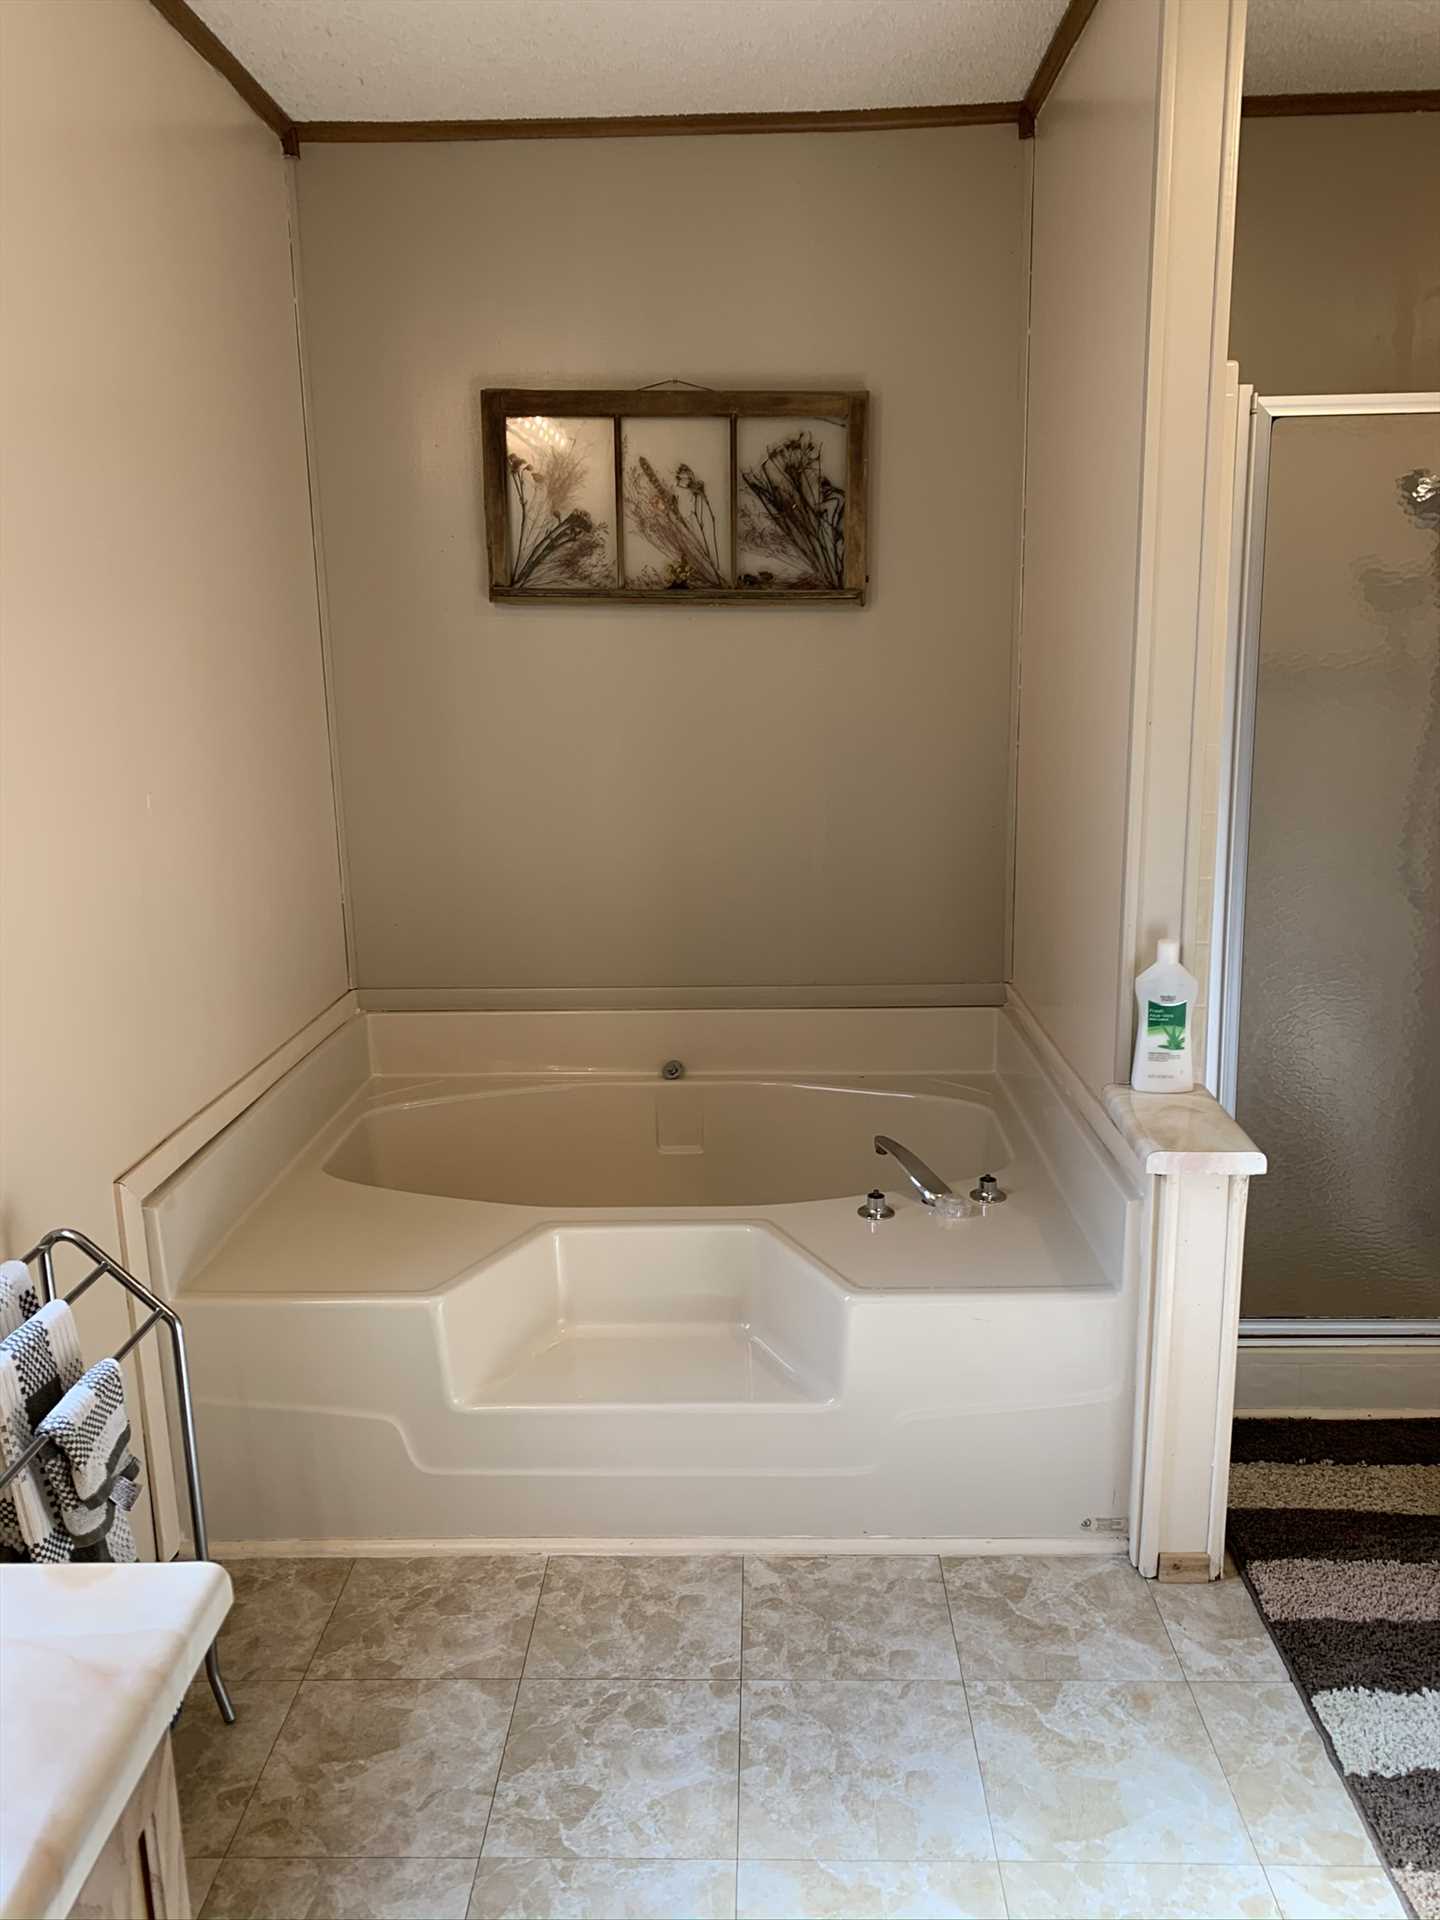                                                 Slow, soothing soak, or quick cleanup? The master bath has you covered both ways, with its garden tub and shower stall.